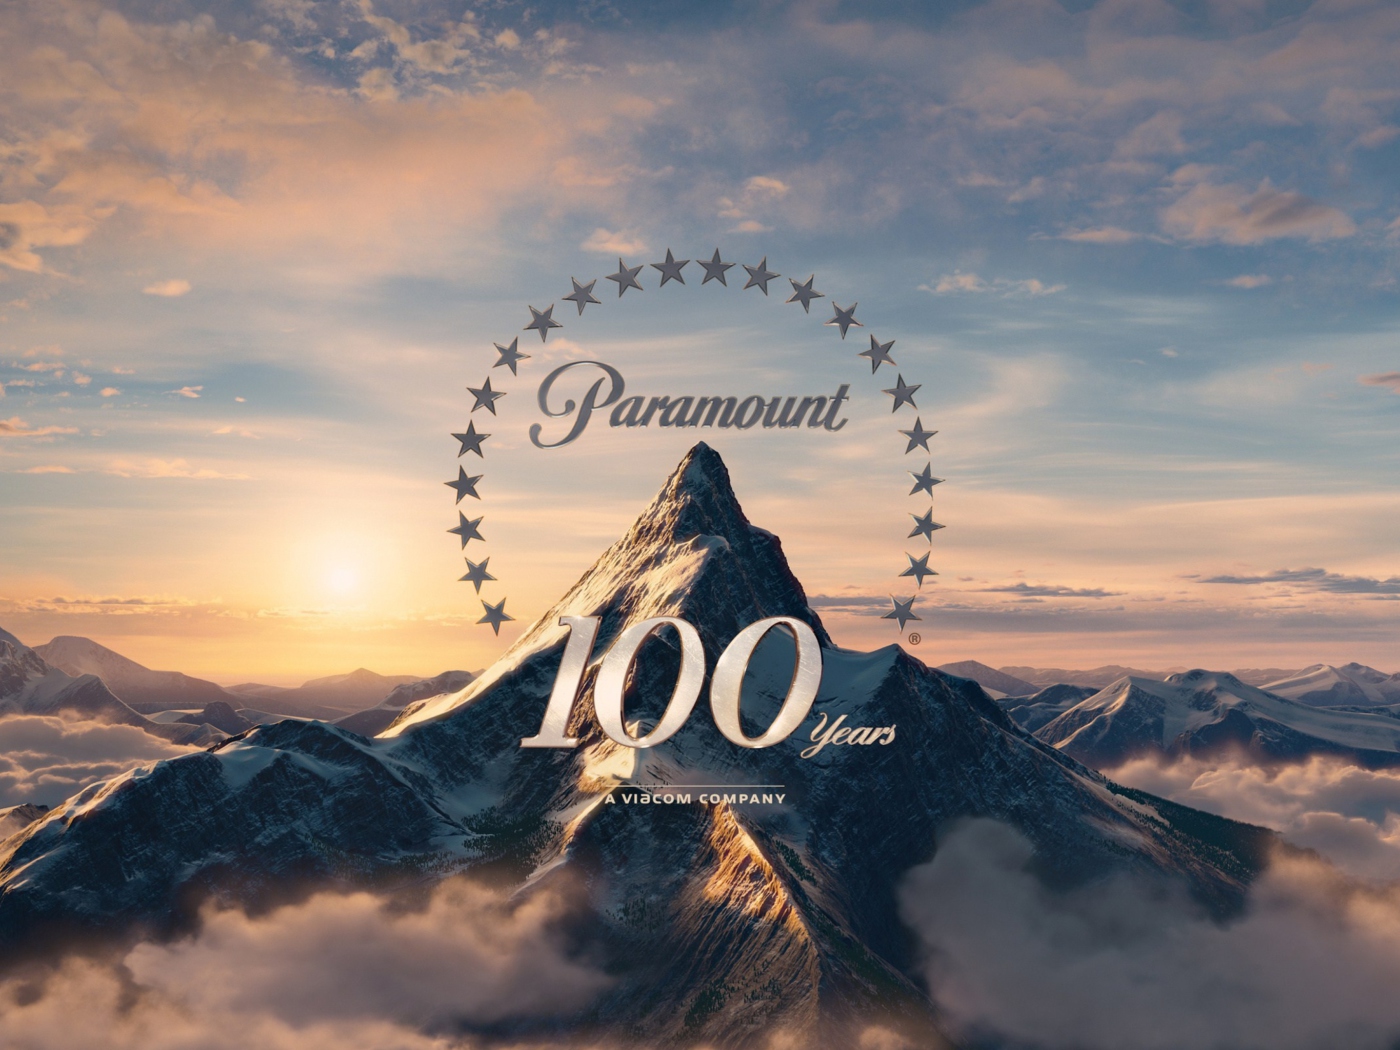 Paramount Pictures 100 Years screenshot #1 1400x1050